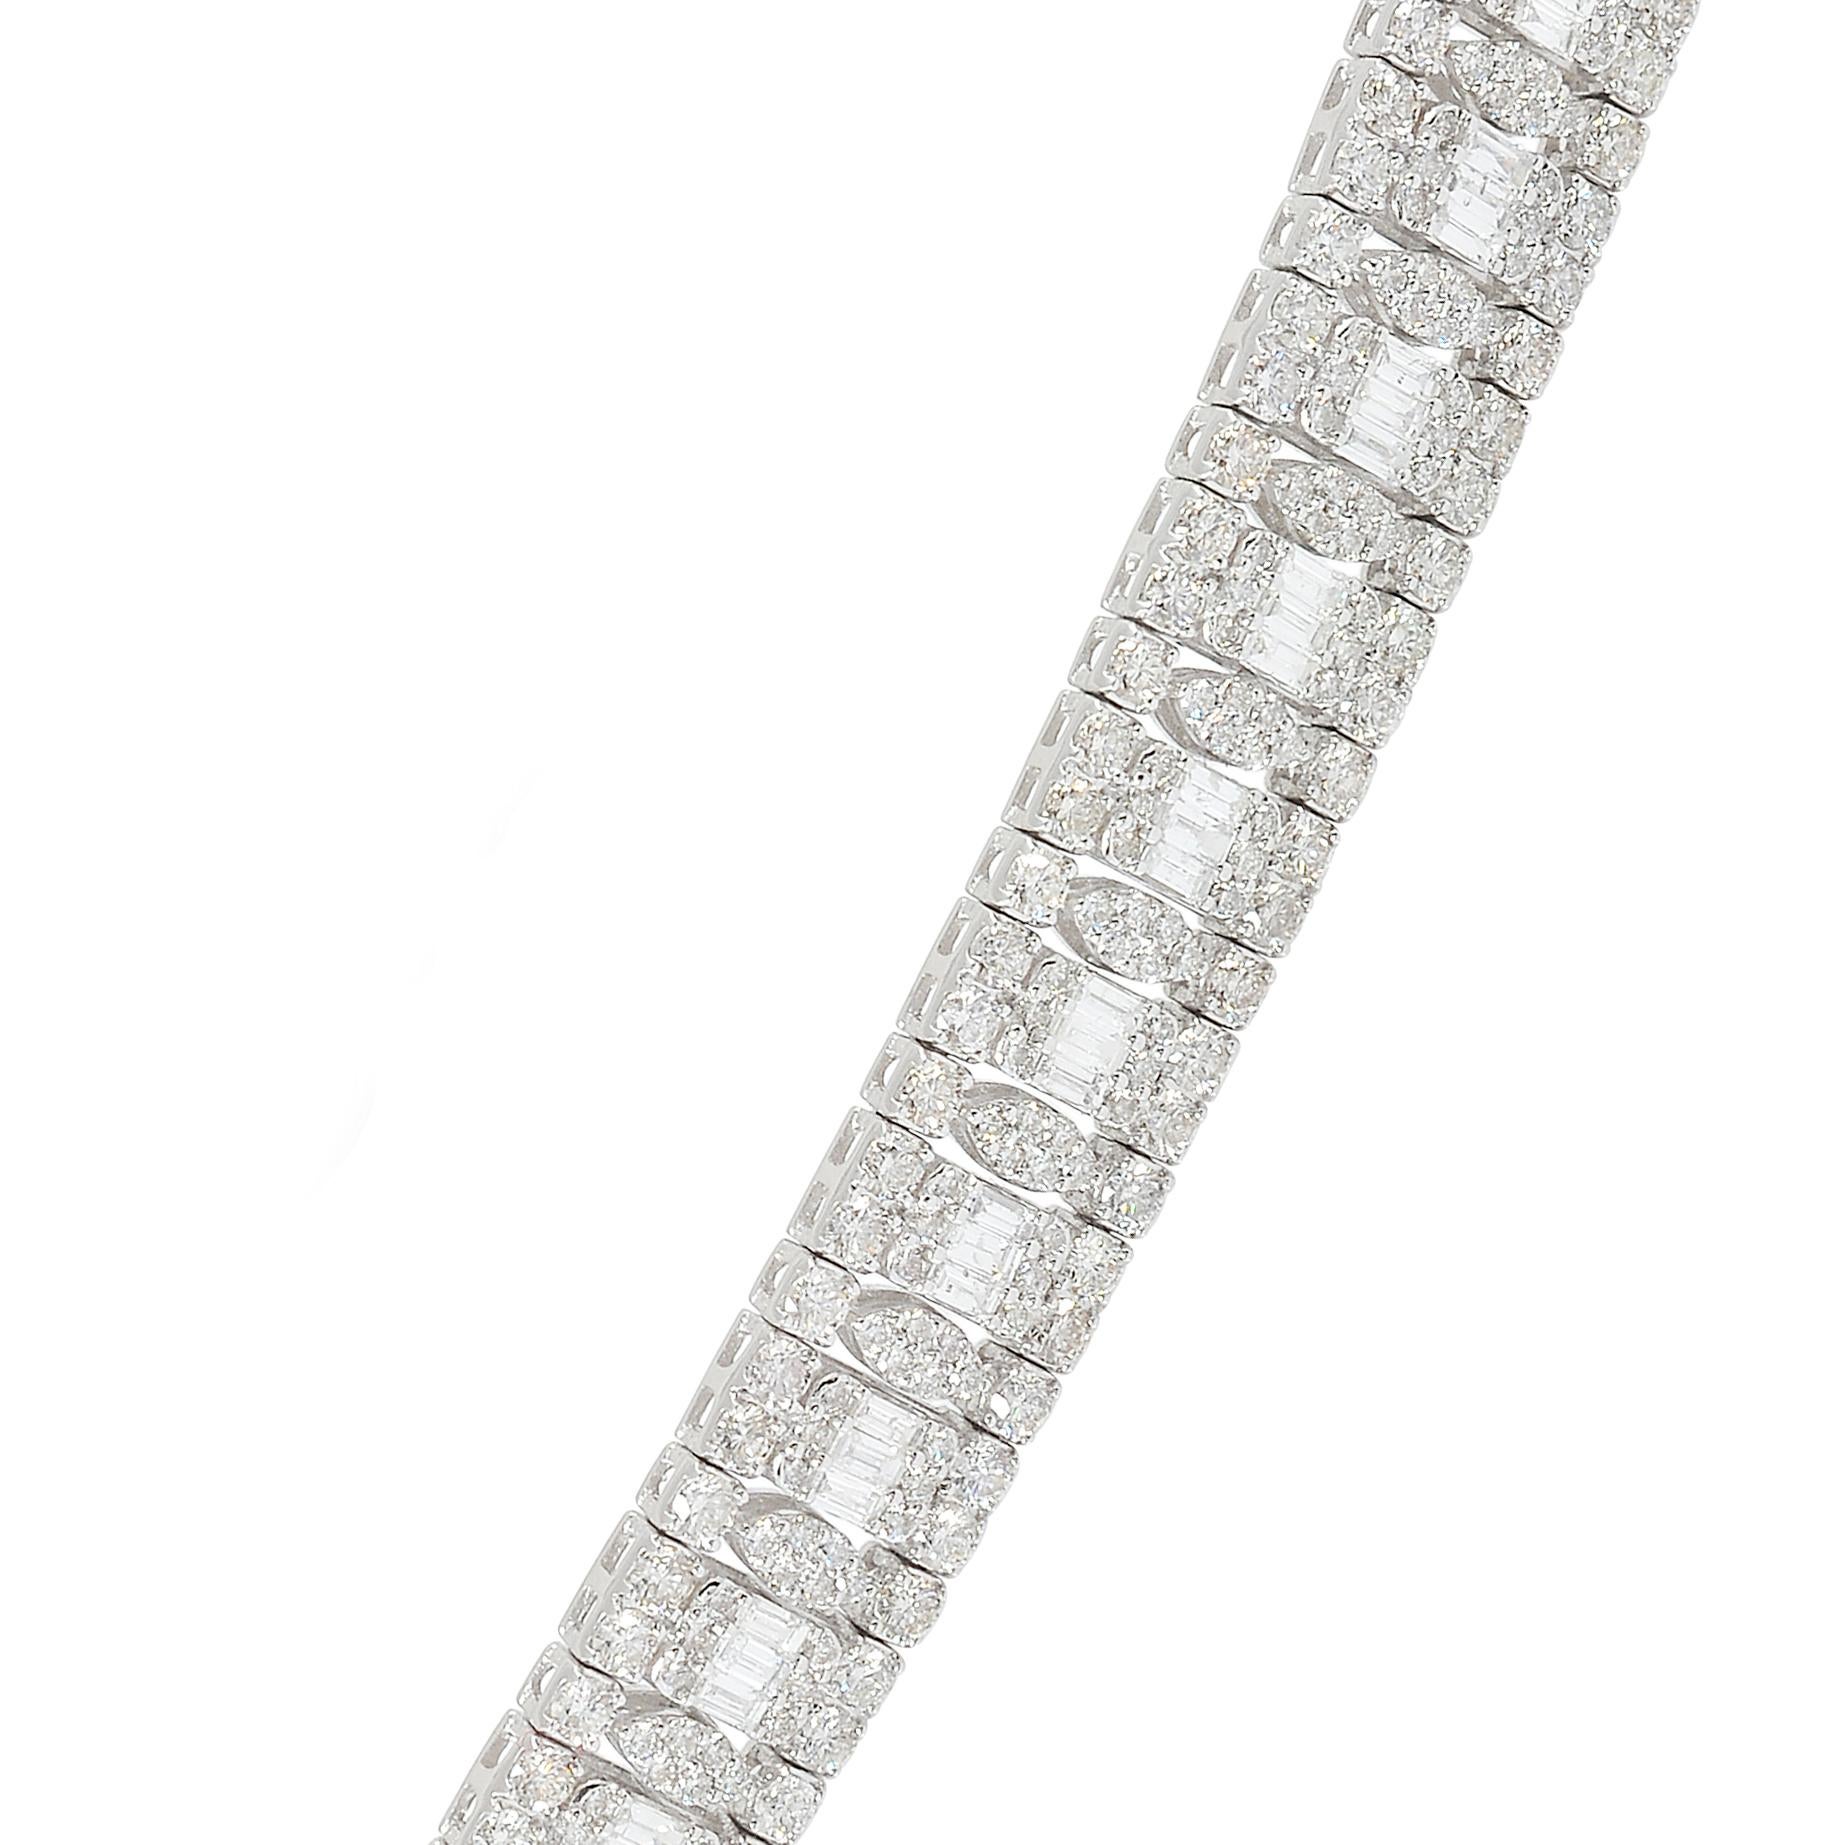 Introducing our breathtaking 13.35 carat SI clarity HI color baguette diamond choker necklace, a true masterpiece of fine jewelry meticulously crafted in 14 karat white gold. This necklace showcases the mesmerizing beauty and brilliance of